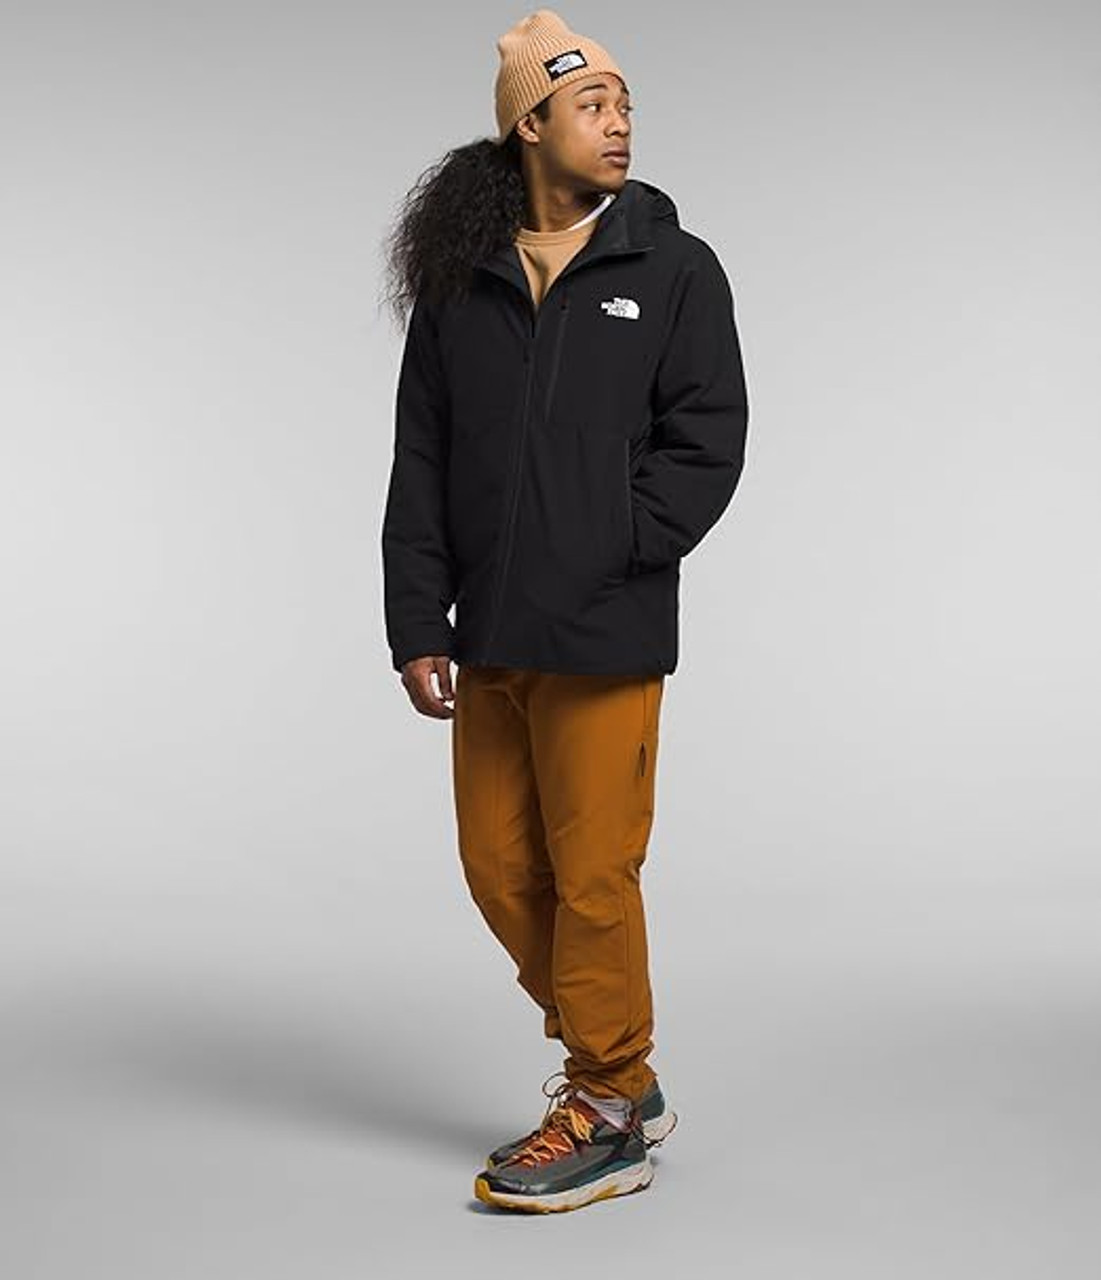 The North Face Apex Elevation Insulated Soft-Shell Jacket - Women's